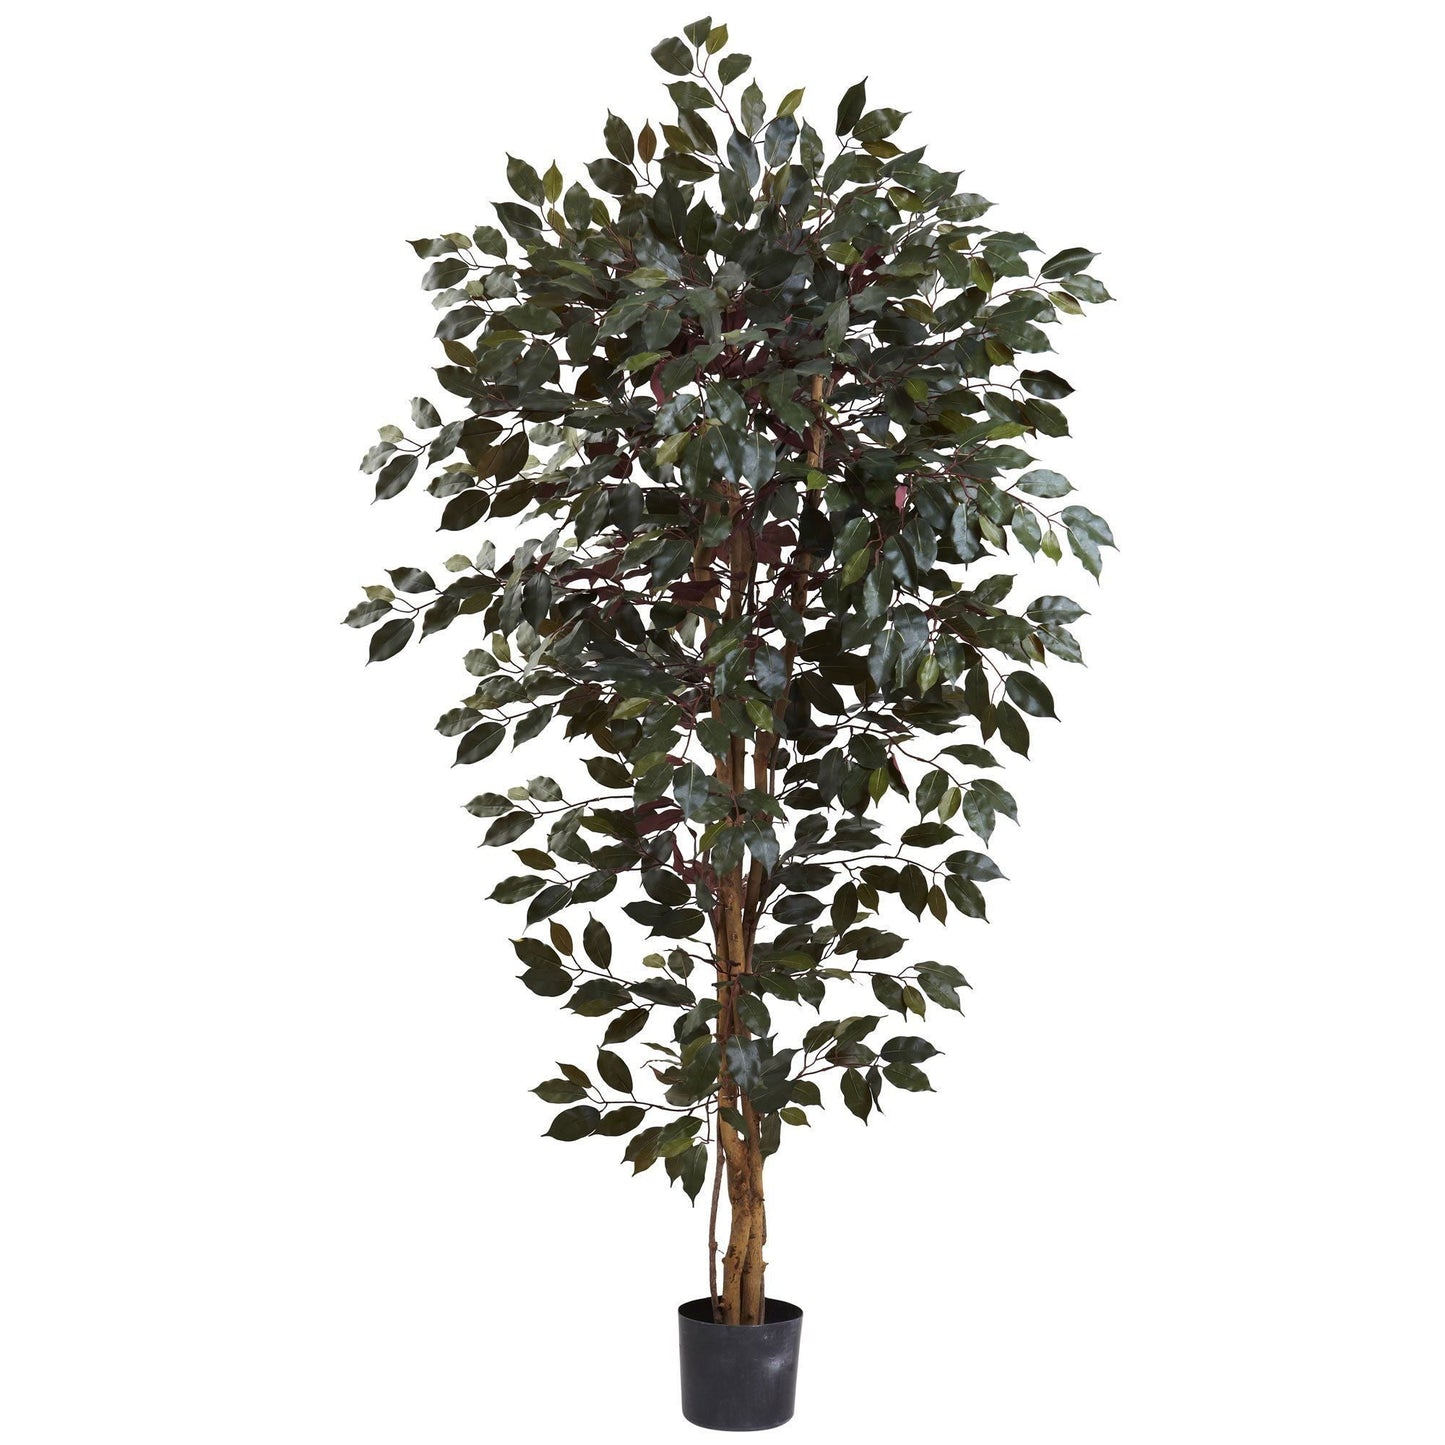 6’ Capensia Ficus Tree x 3 w/1008 Lvs by Nearly Natural